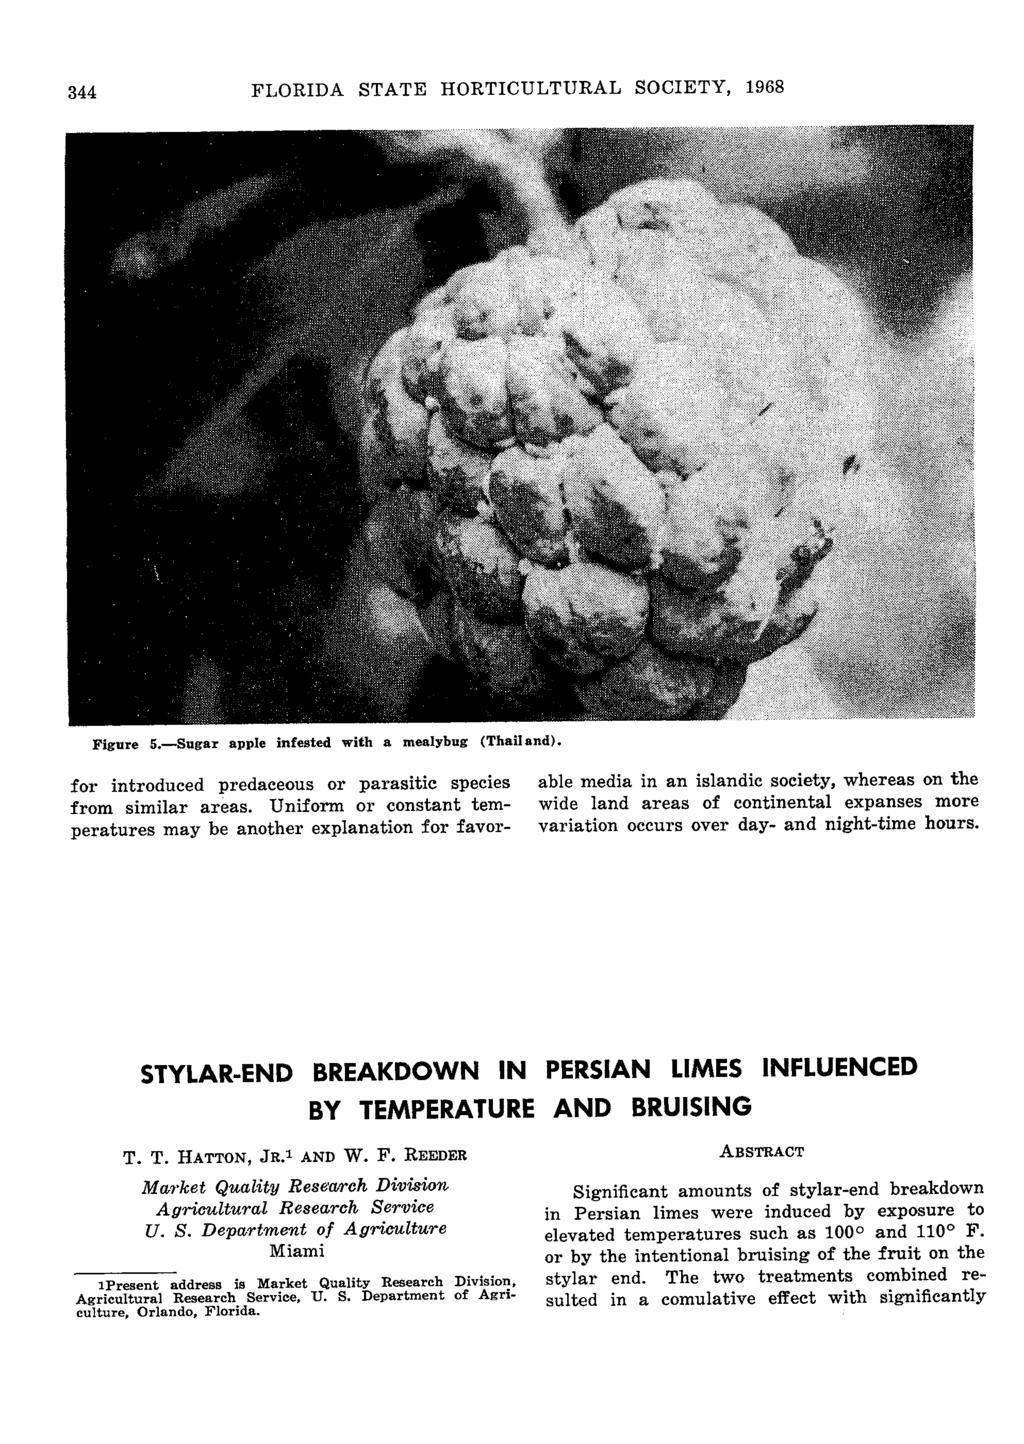 344 FLORIDA STATE HORTICULTURAL SOCIETY, 1968 Figure 5. Sugar apple infested with a mealybug (Thailand). for introduced predaceous or parasitic species from similar areas.